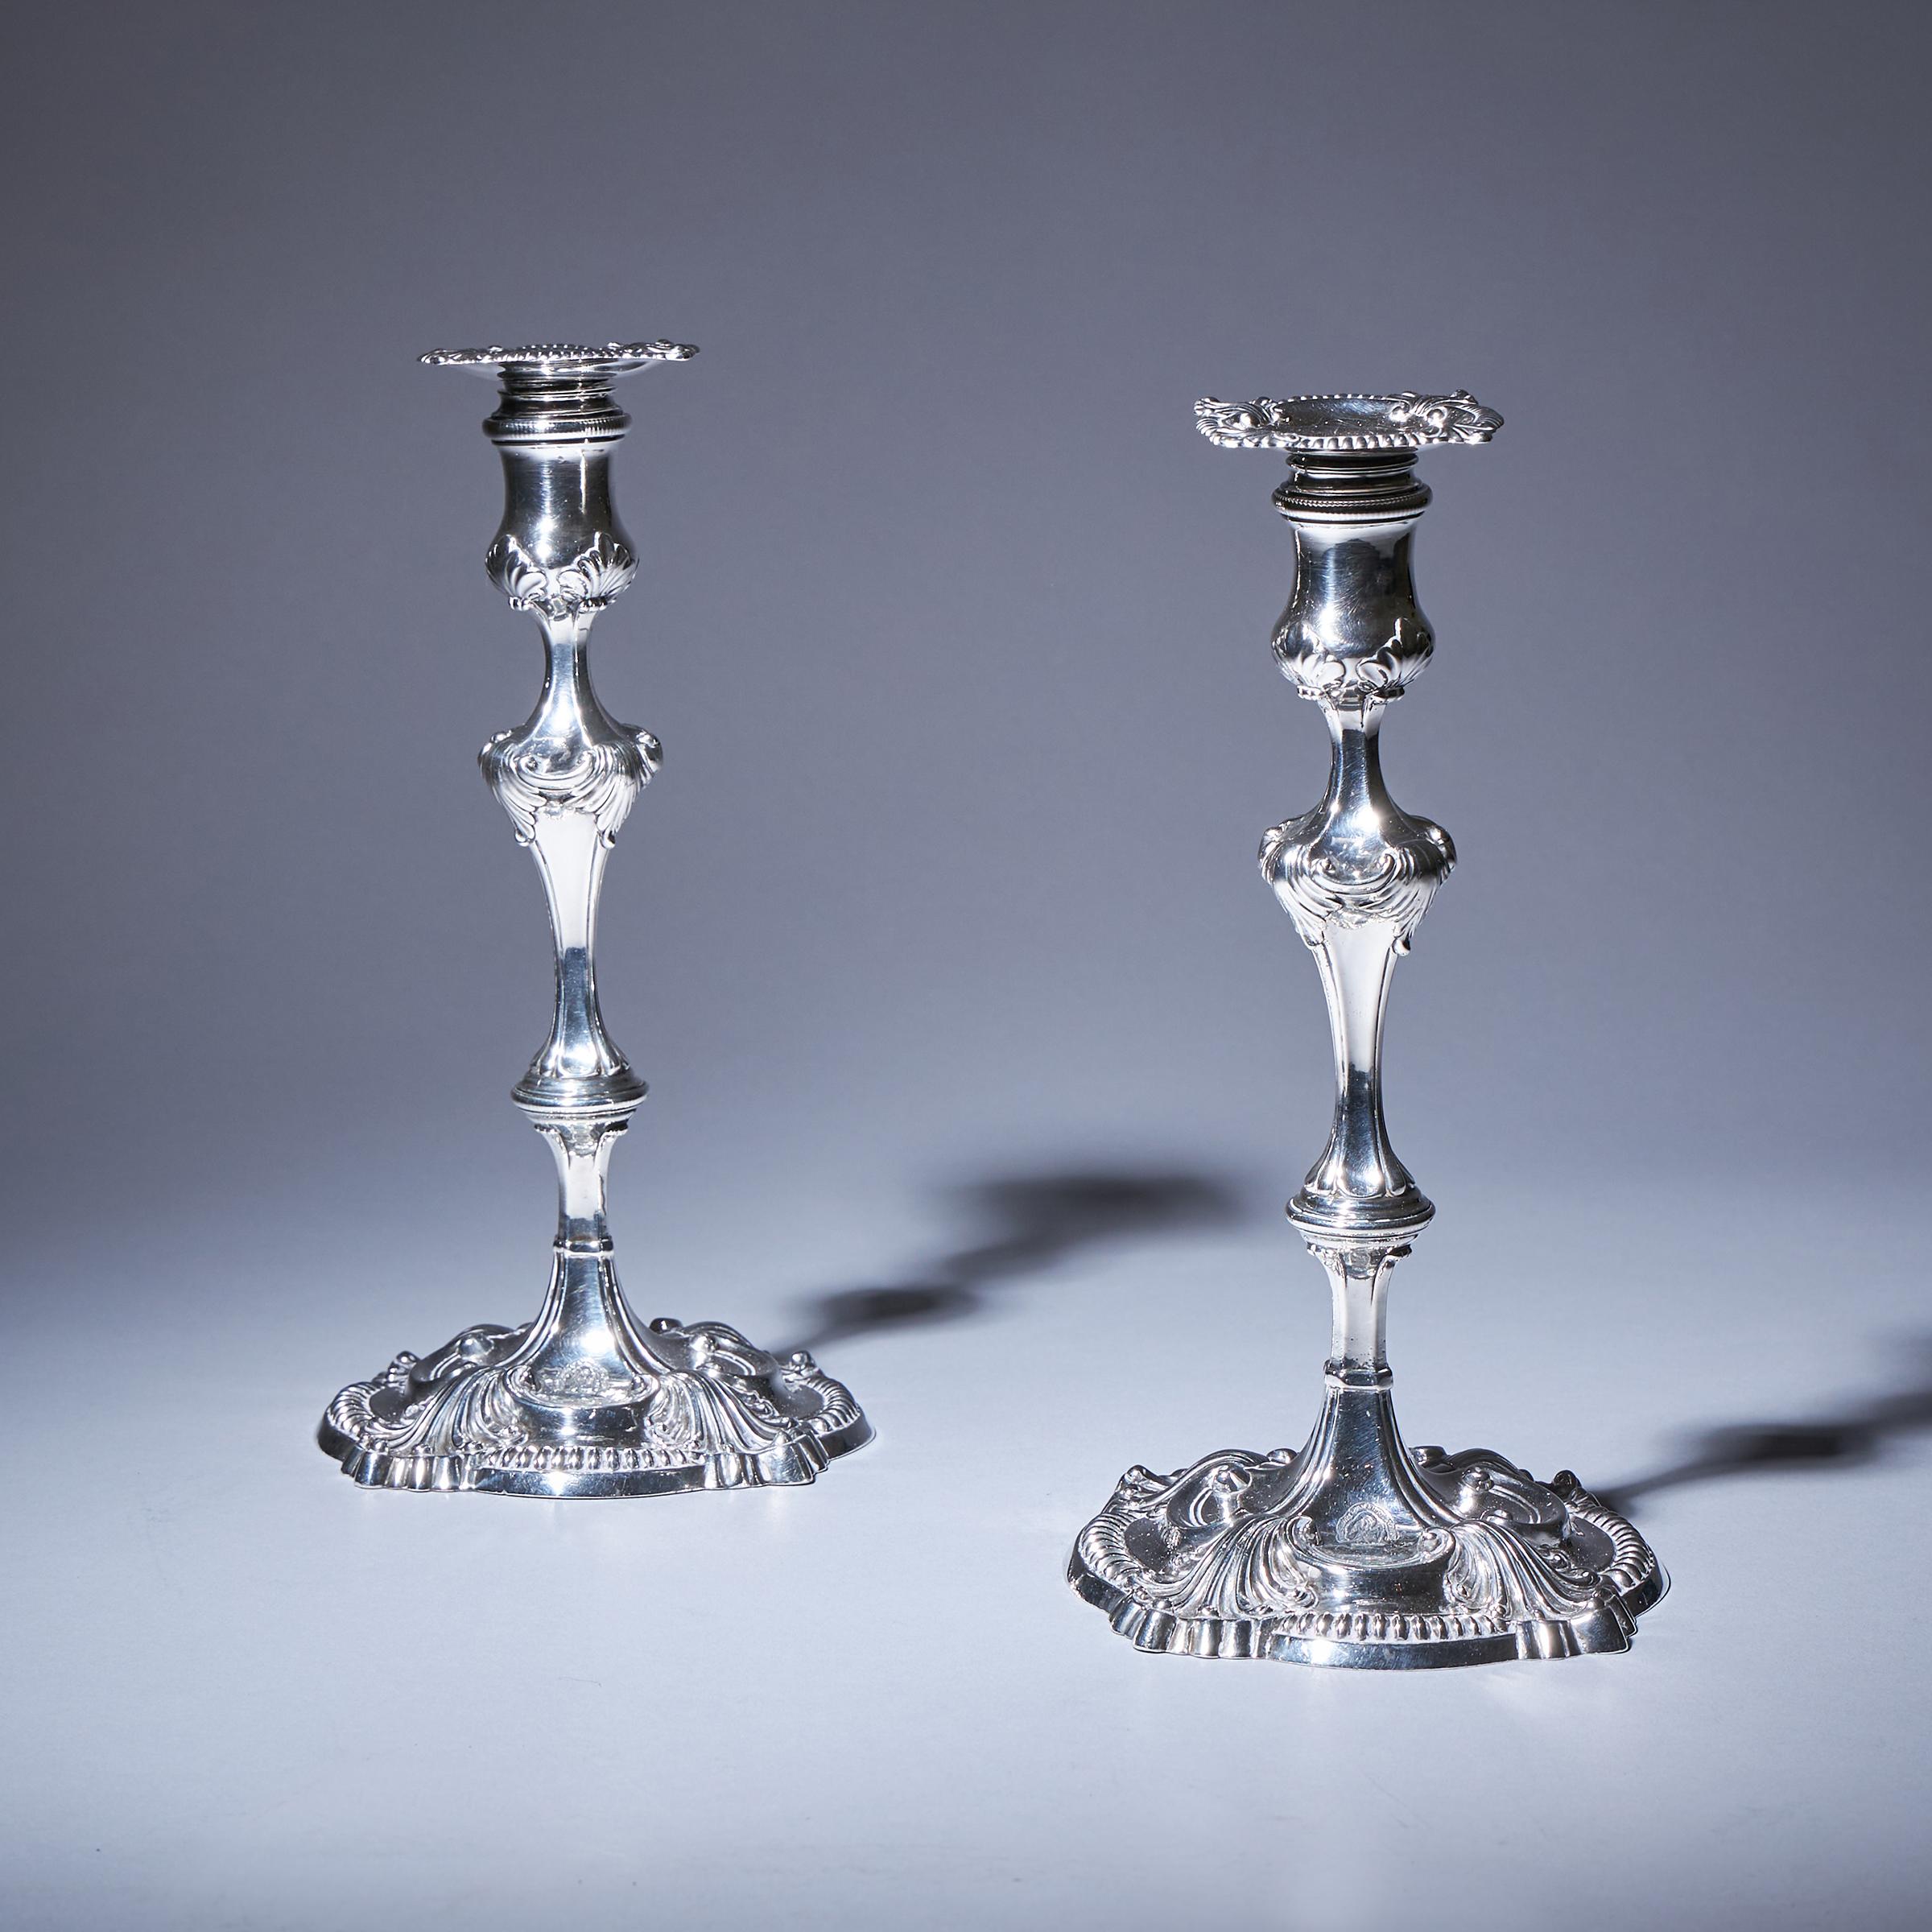 An outstanding pair of 18th-century Rocco George III silver candlesticks with original detachable sconces. 

Made in London, 1762 by David Bell. 

Each candlestick is in excellent condition, numbered No 1 and No 2, and features a full set of